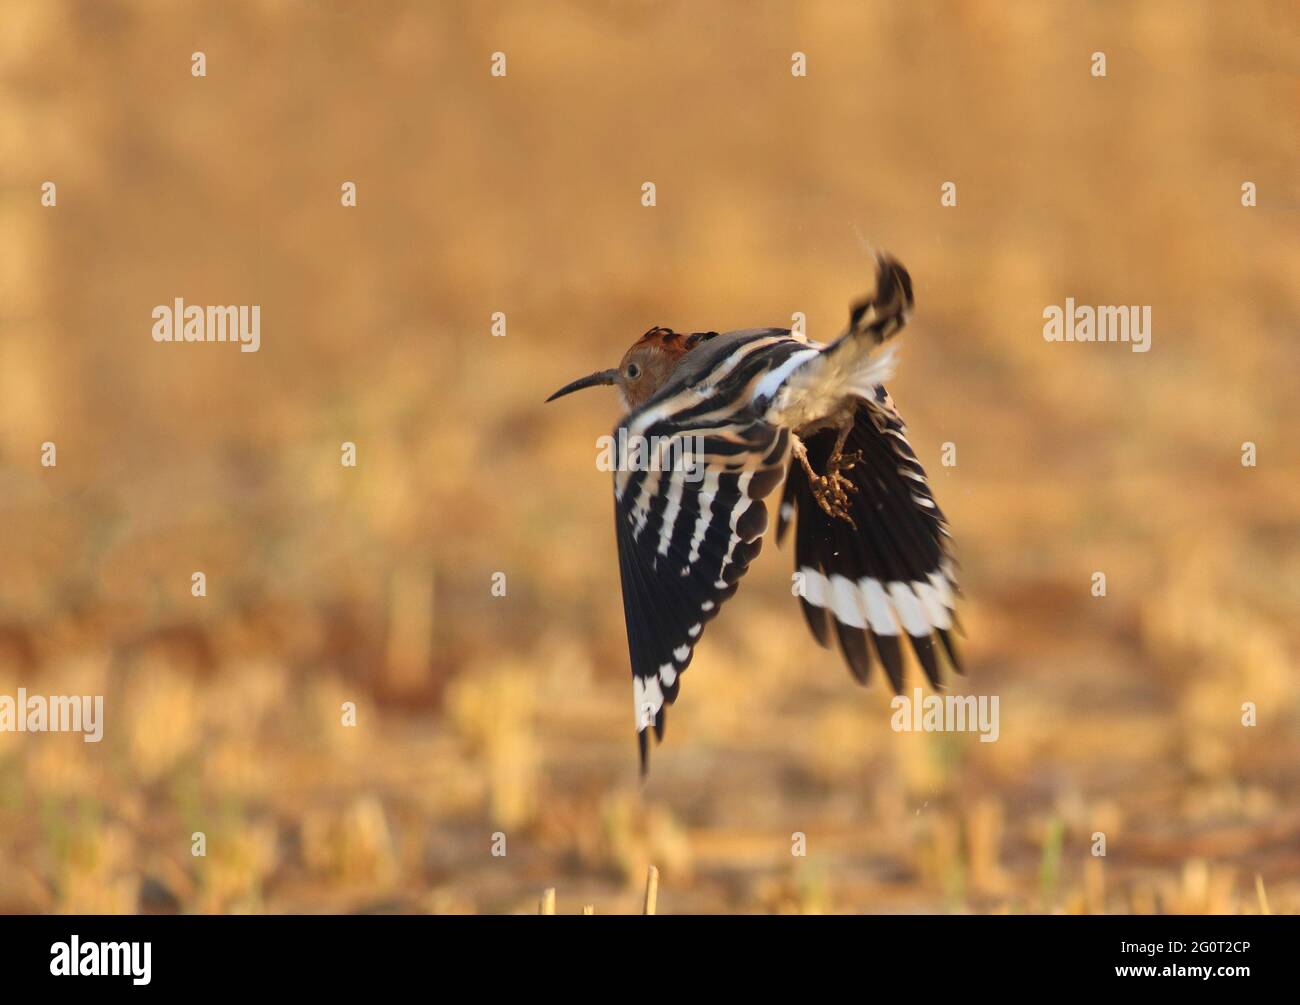 hoope in wildlife reserves , Hoopoes are colourful birds found across Africa, Asia, and Europe, notable for their distinctive 'crown' of feathers. Stock Photo